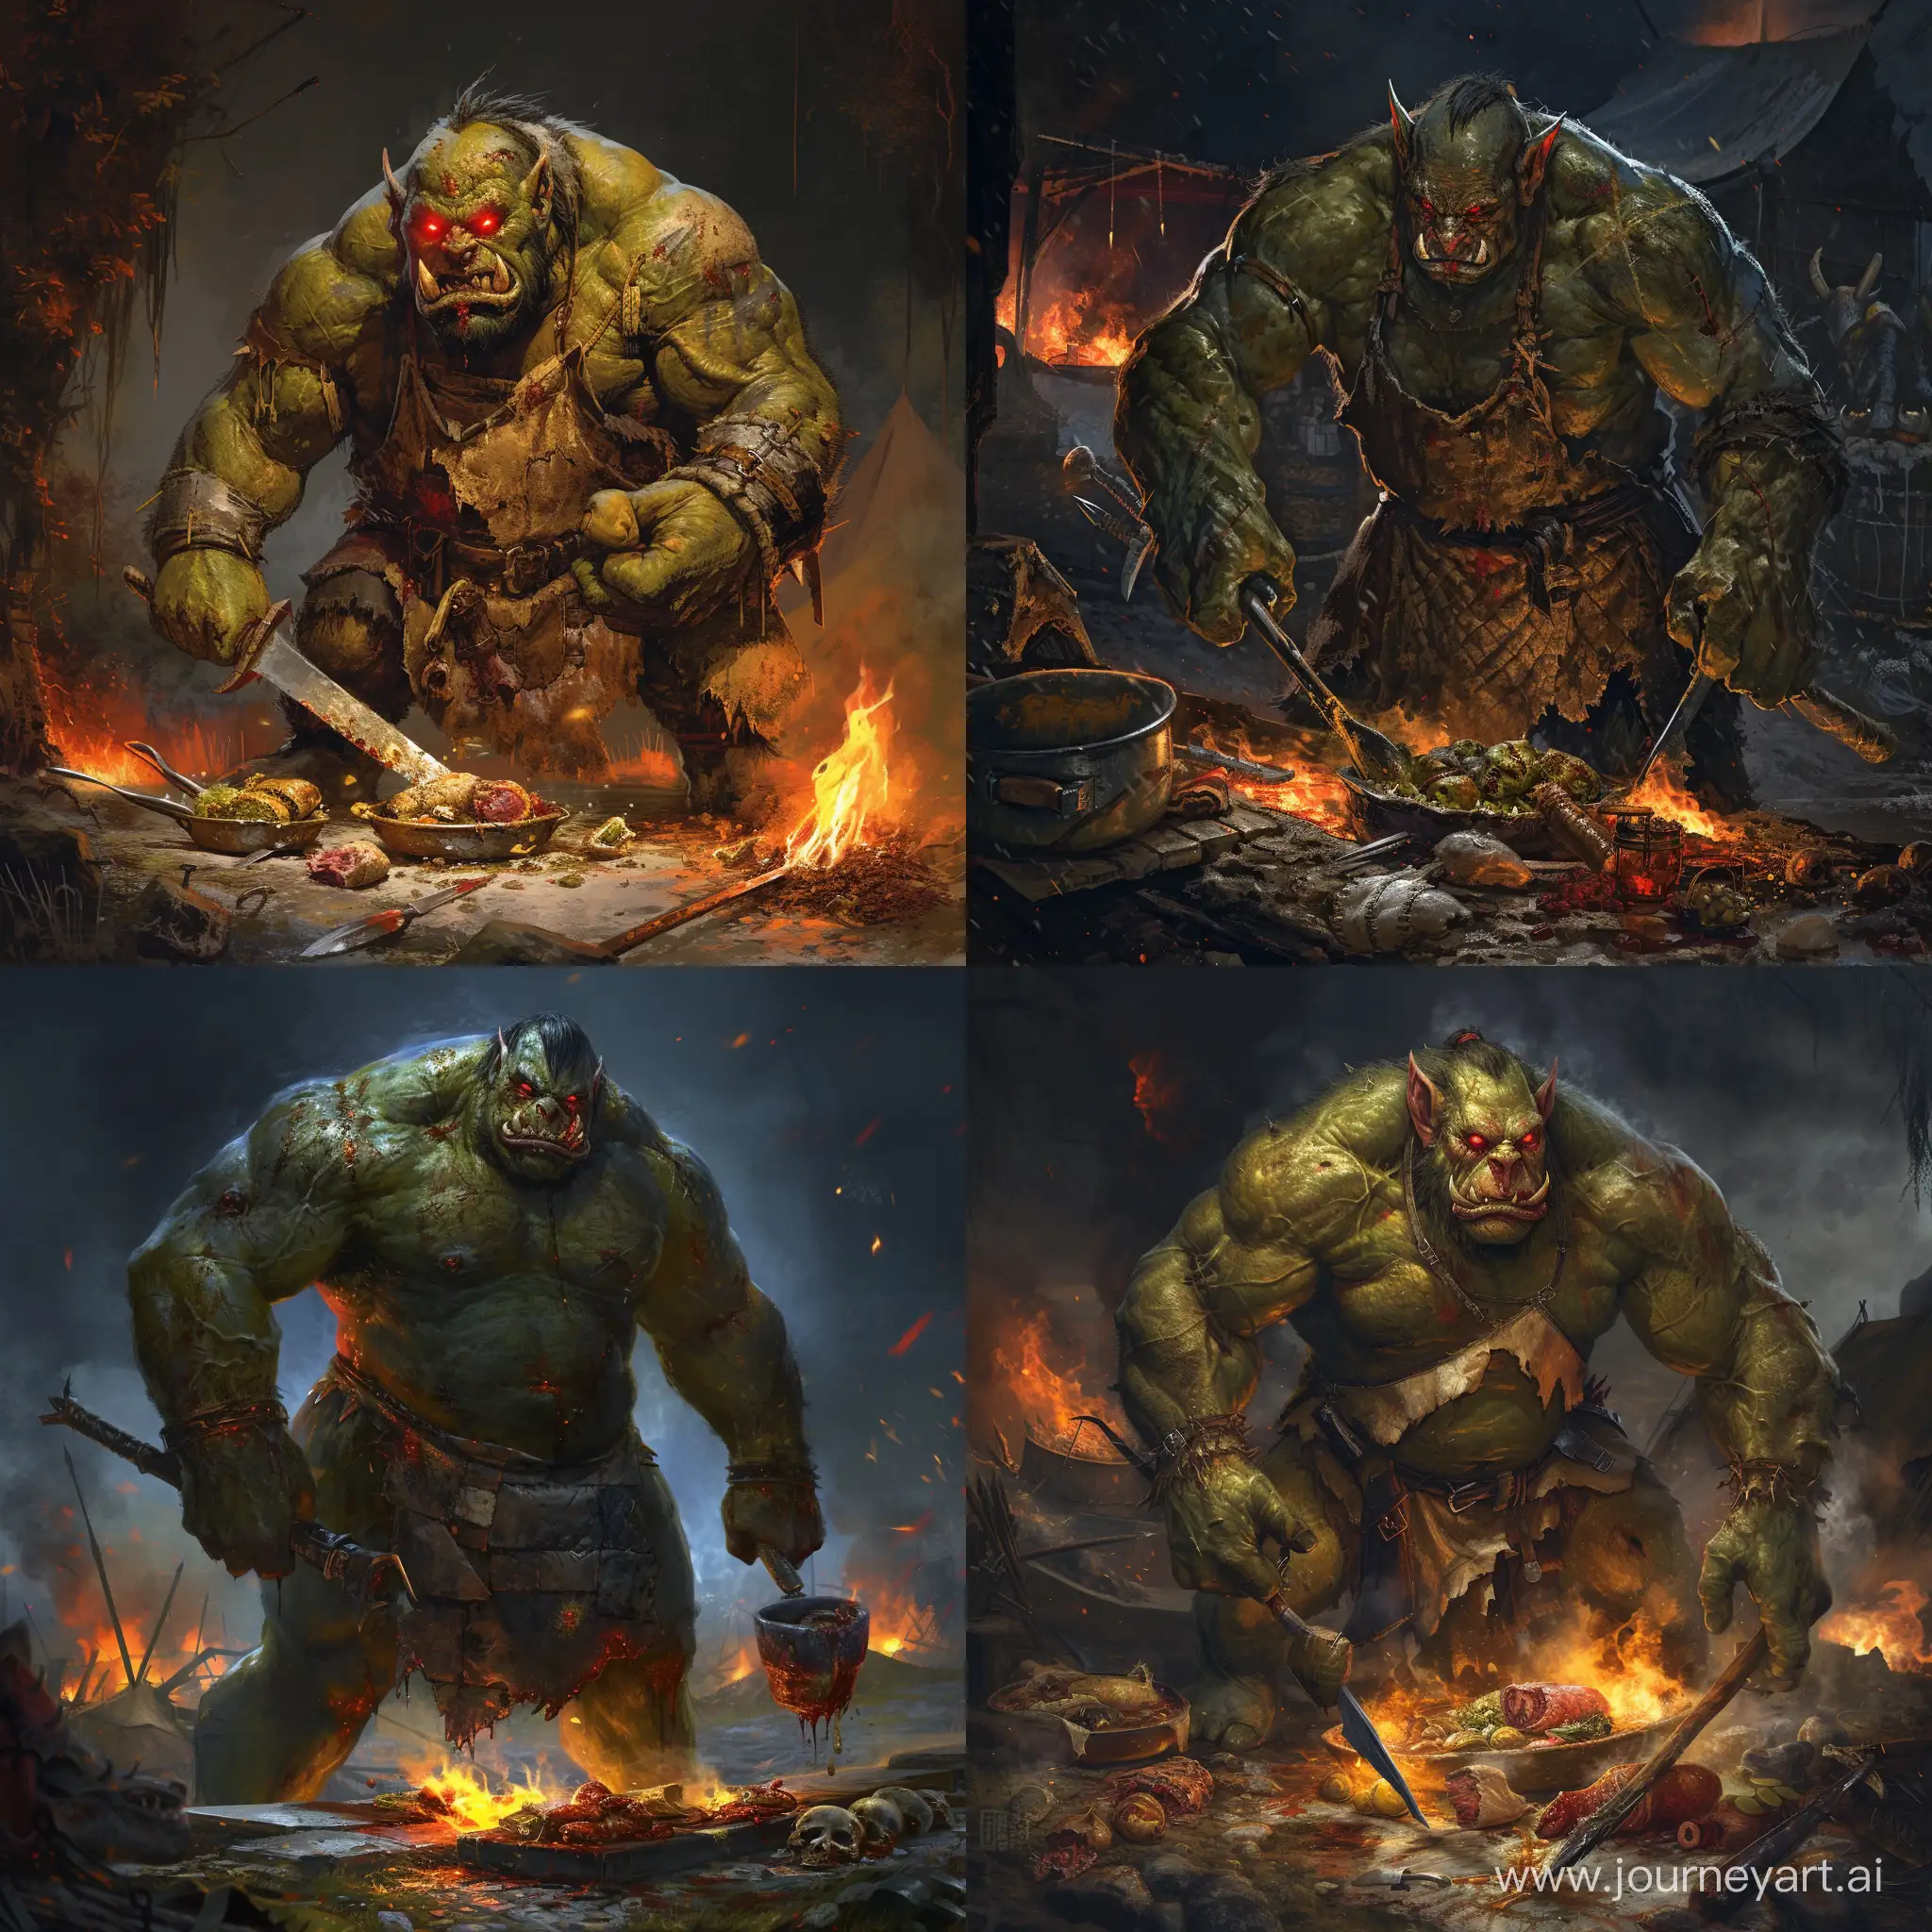 Massive-Orc-Chef-Cooking-Grotesque-Foods-on-Wartorn-Battlefield